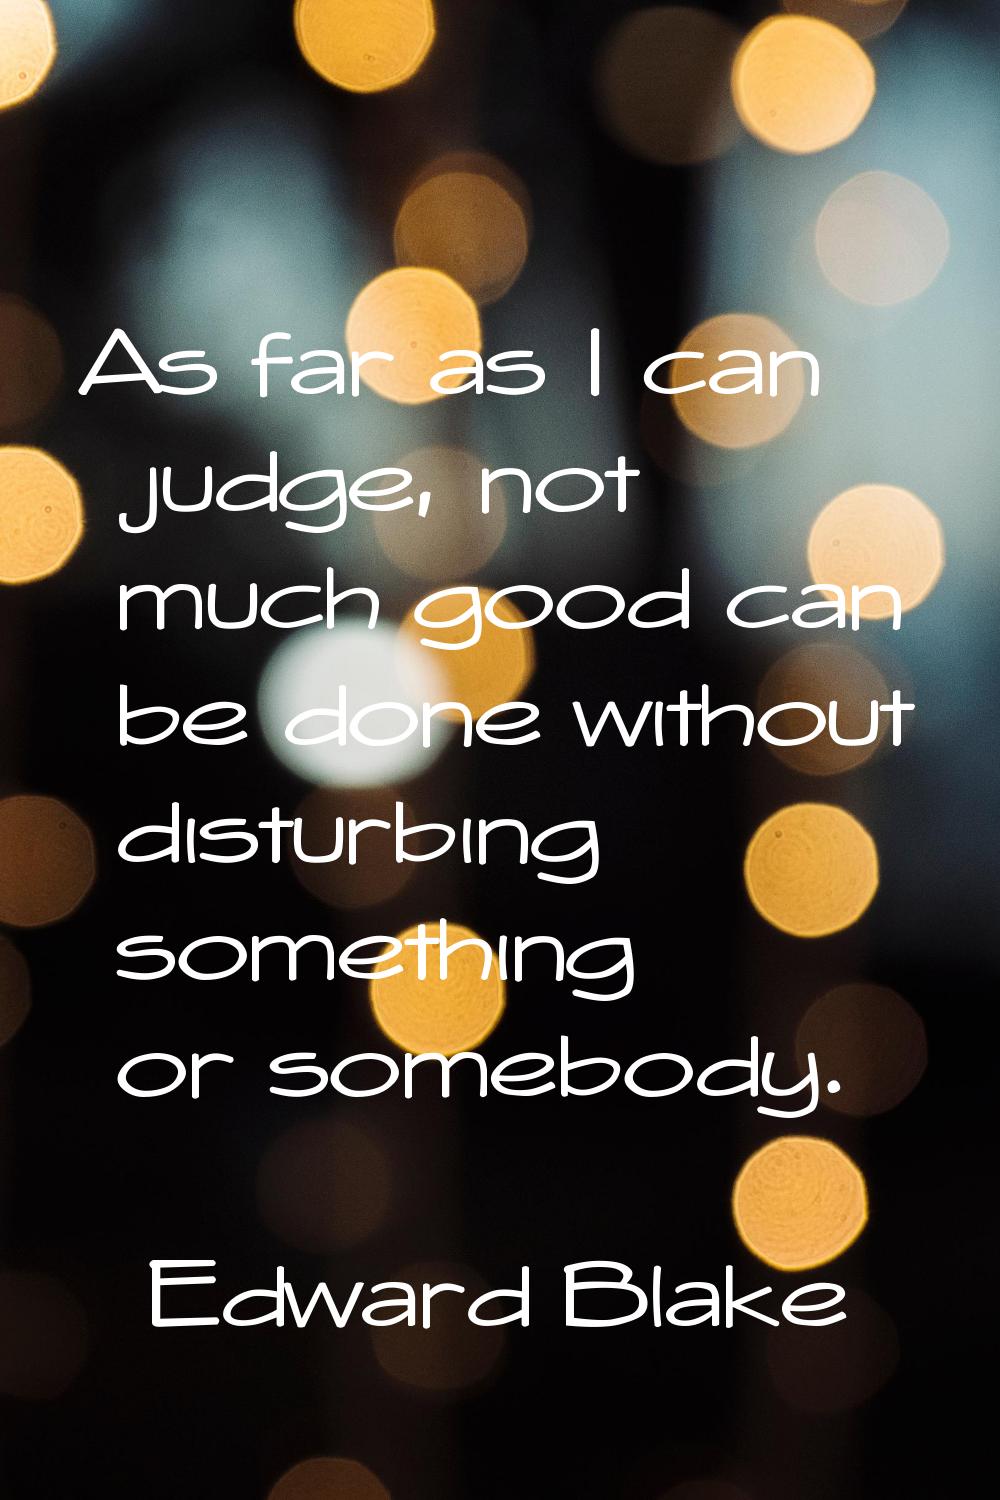 As far as I can judge, not much good can be done without disturbing something or somebody.